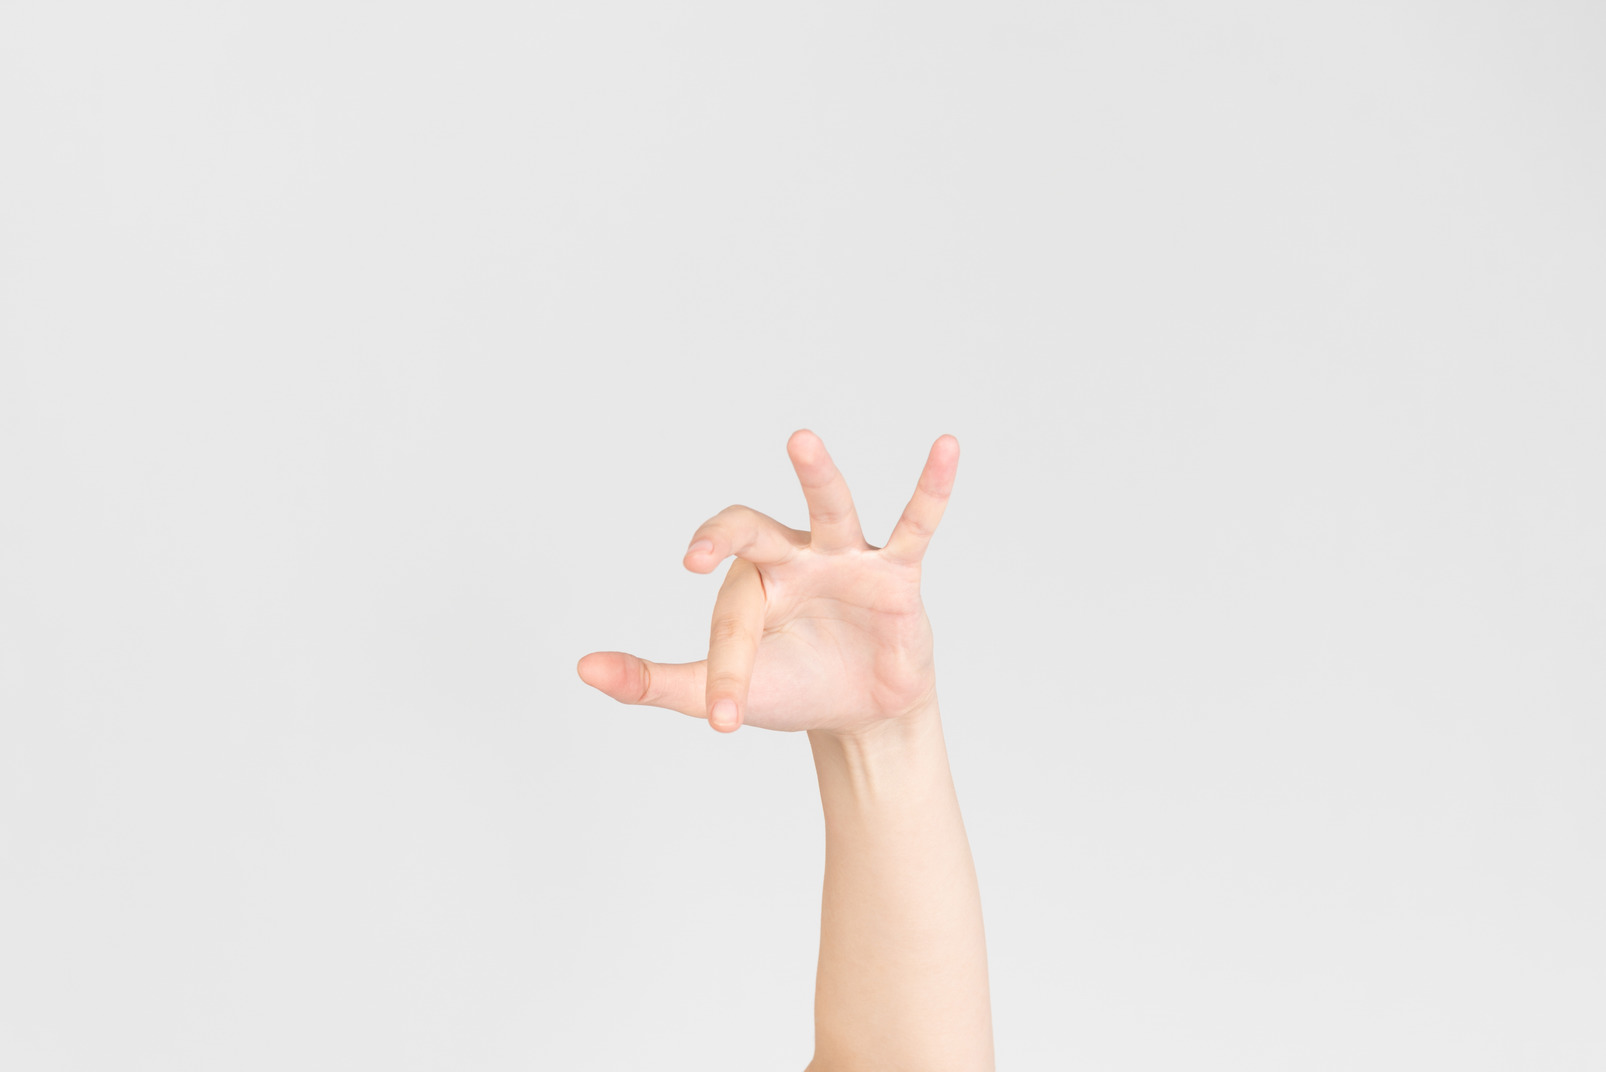 Female hand showing kind of scary gesture